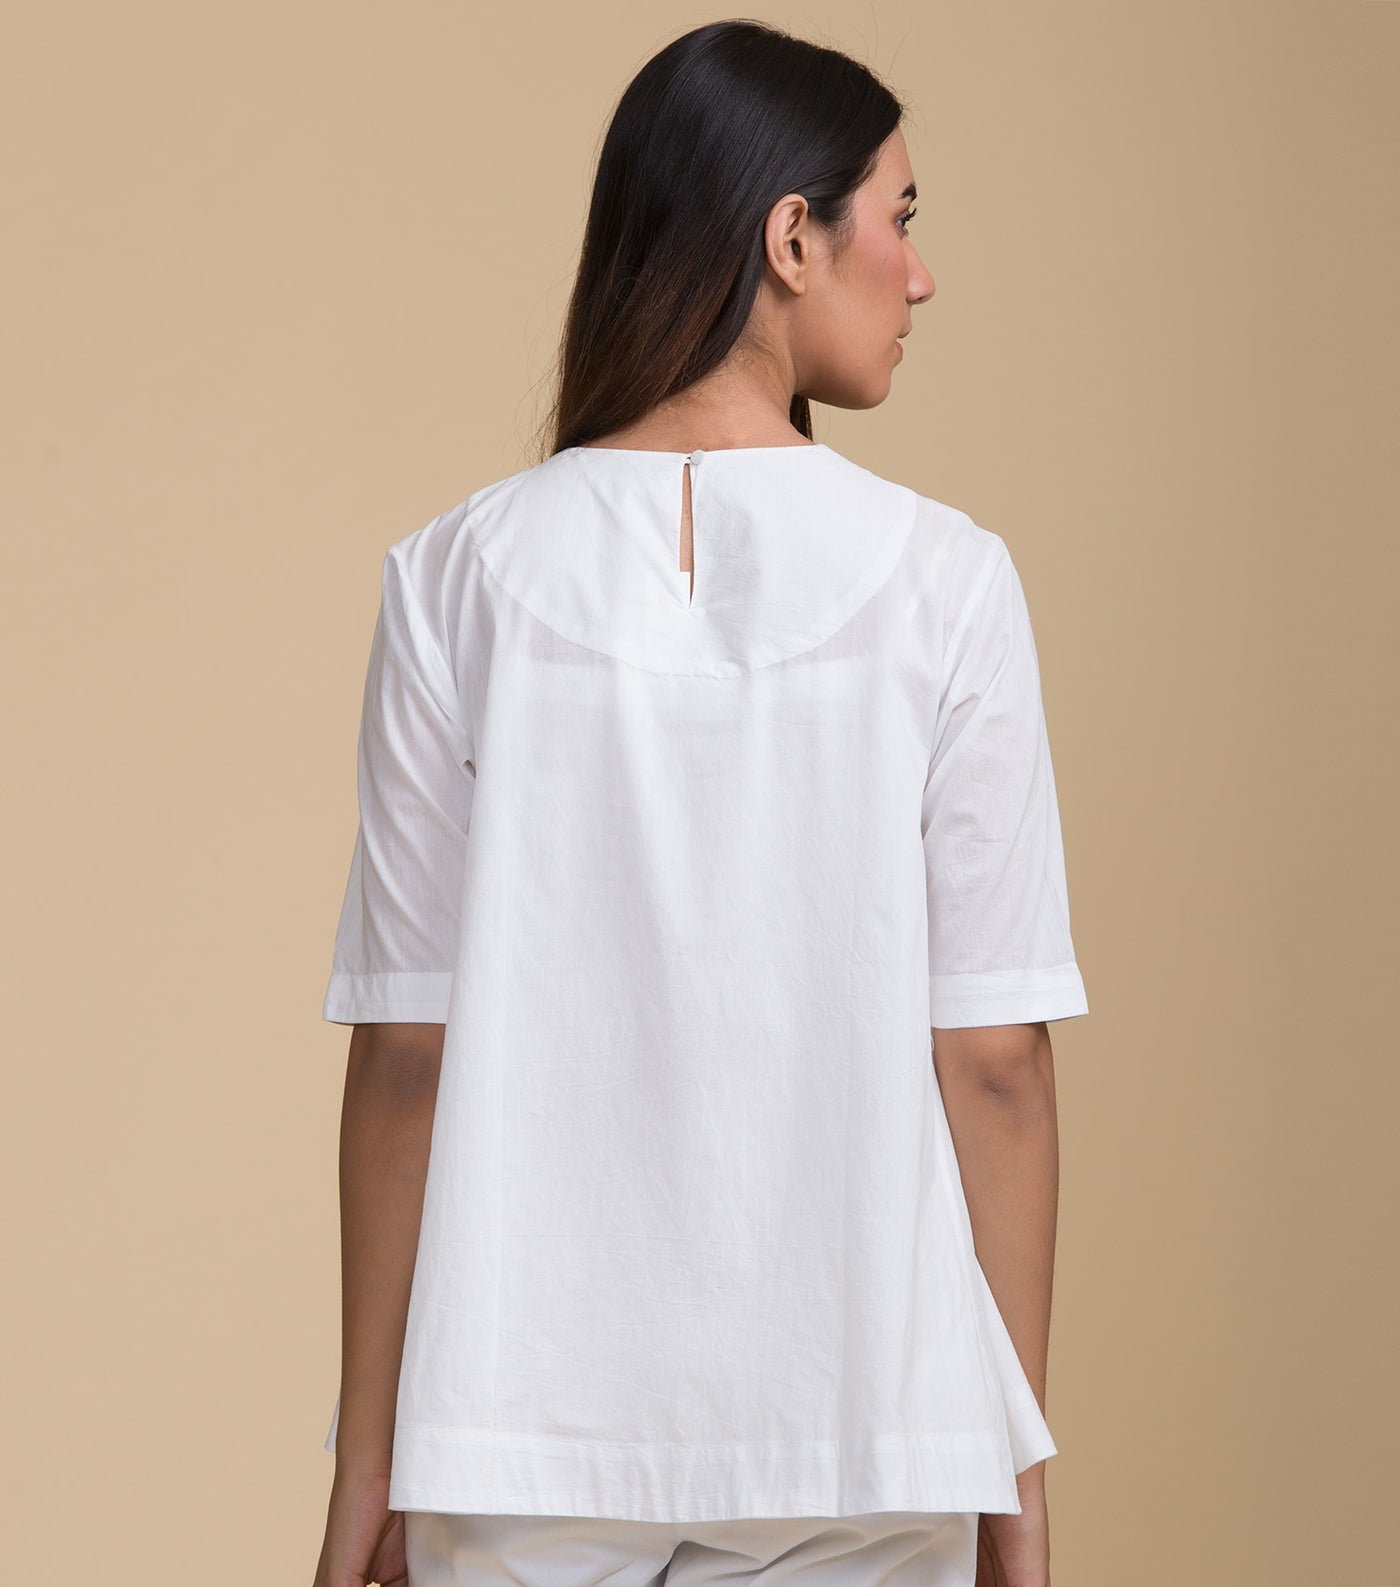 White solid cotton top